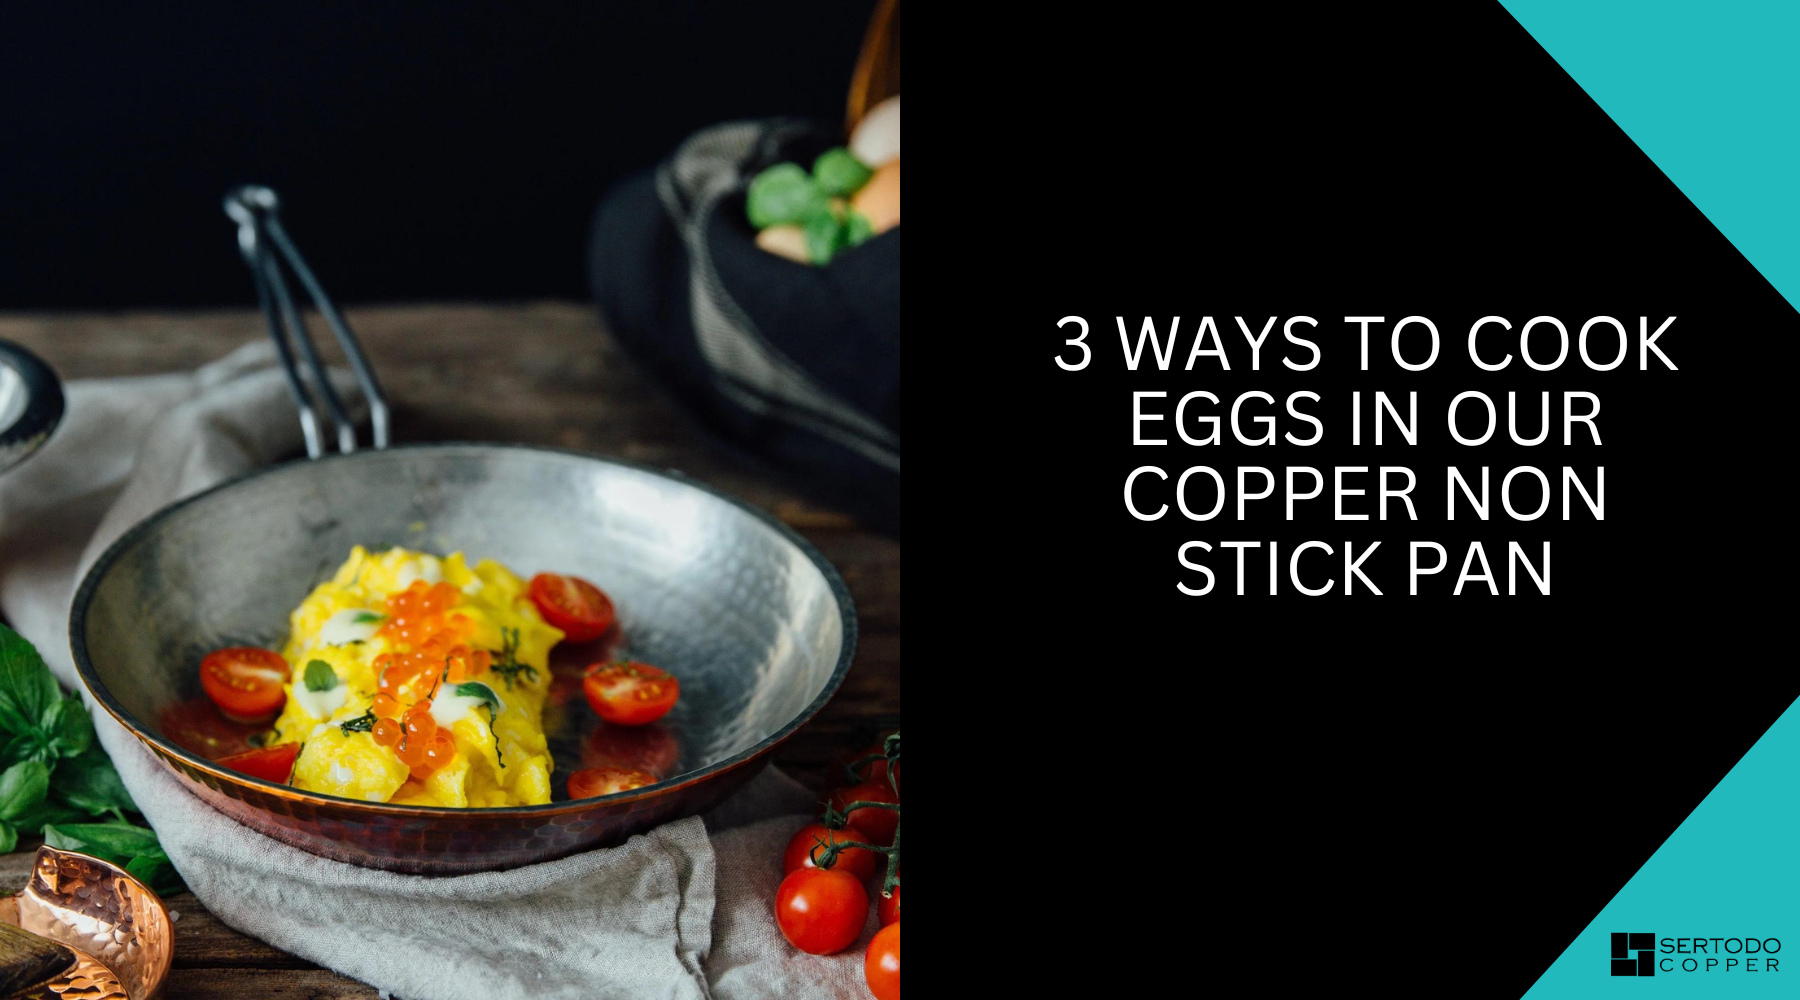 3 Ways To Cook Eggs In Our Copper Non Stick Pan